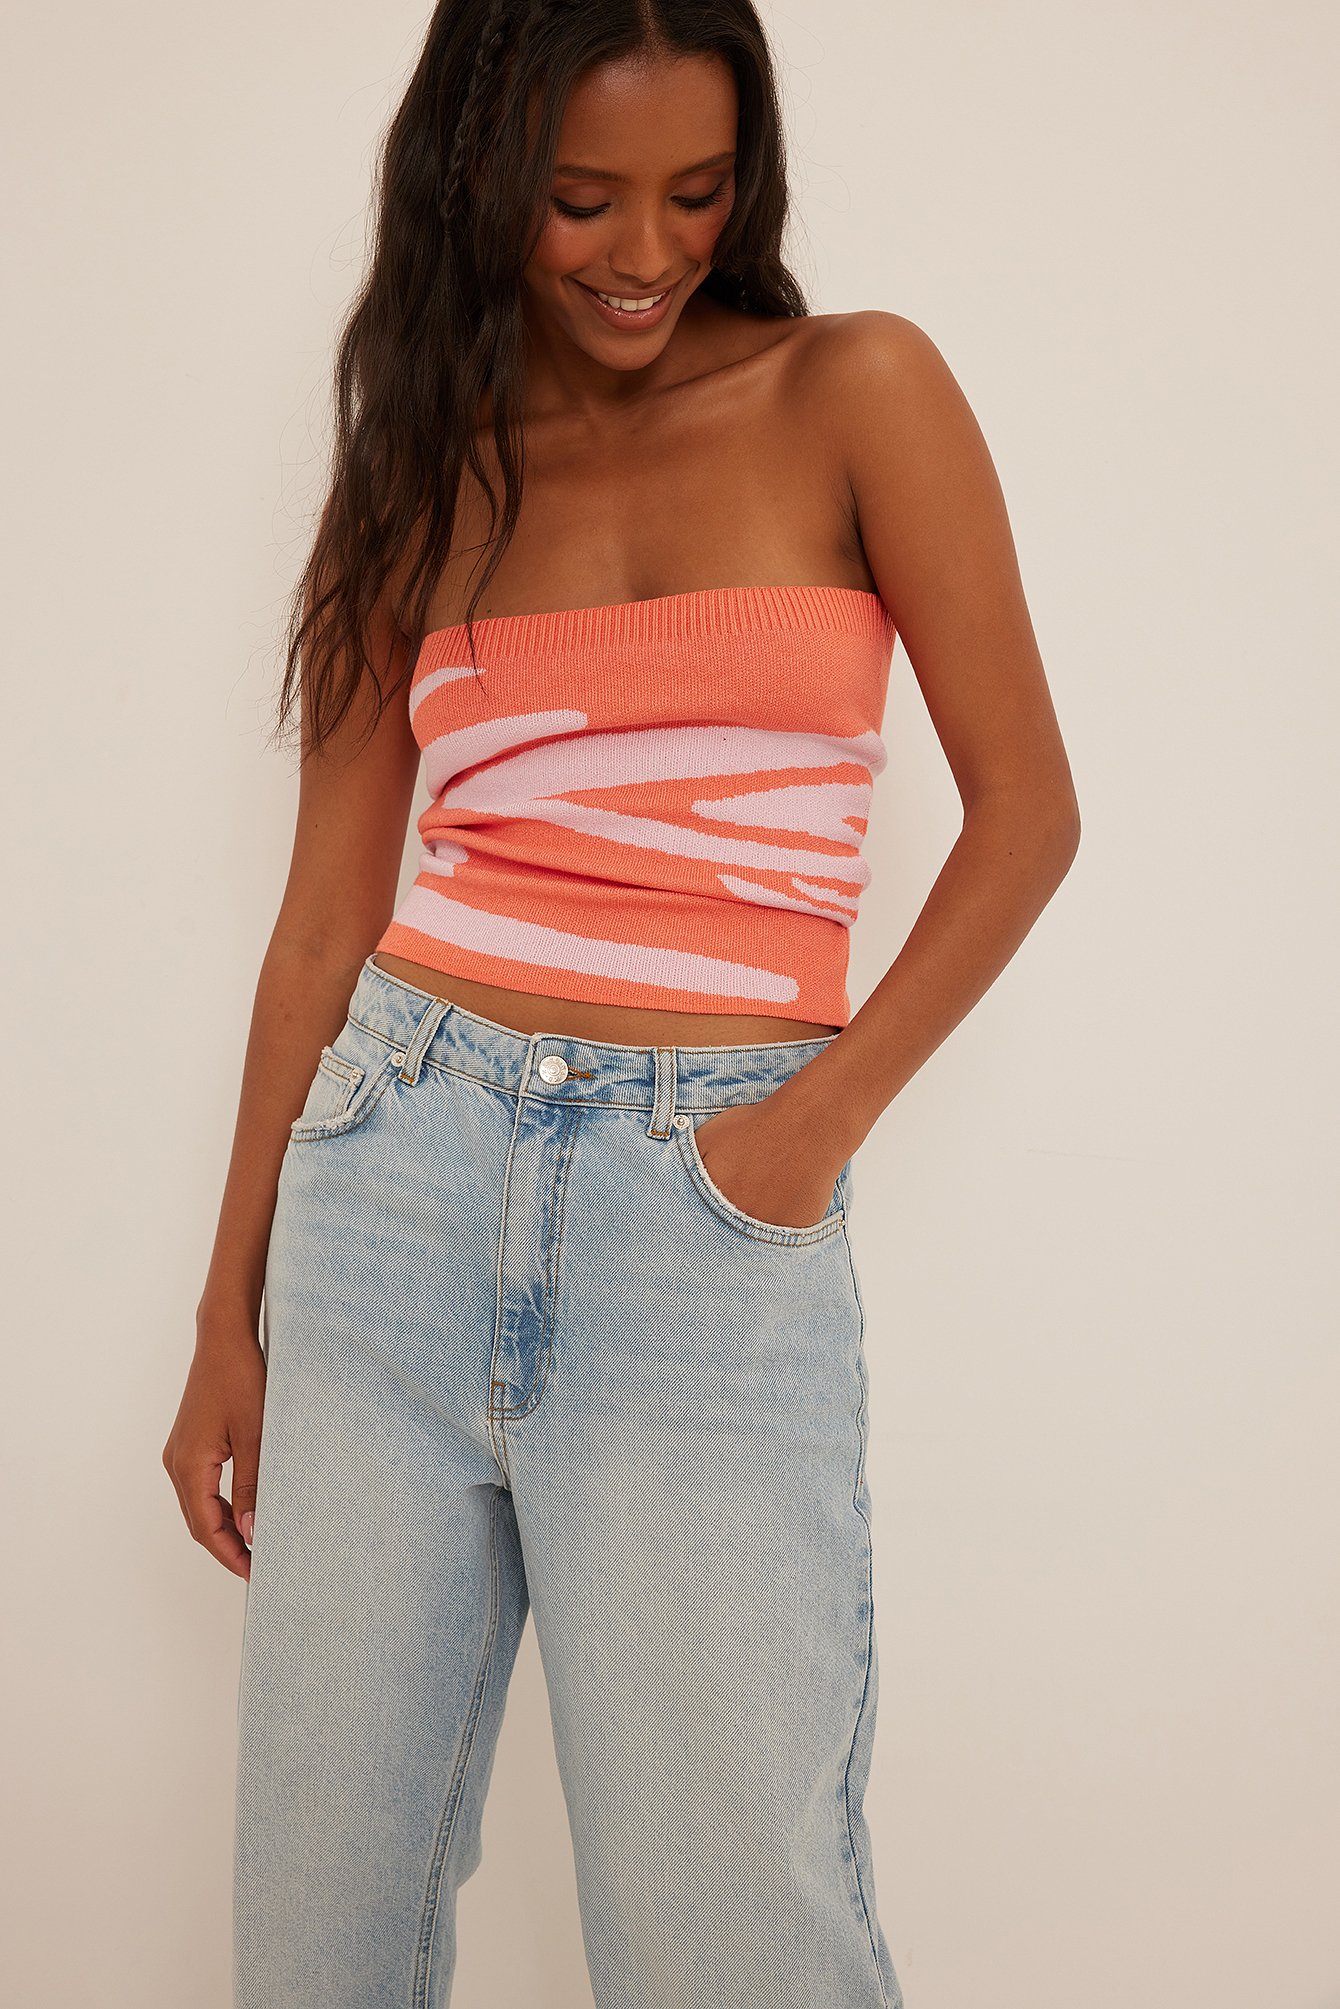 Coral Pink Knitted Pattern Tube Top